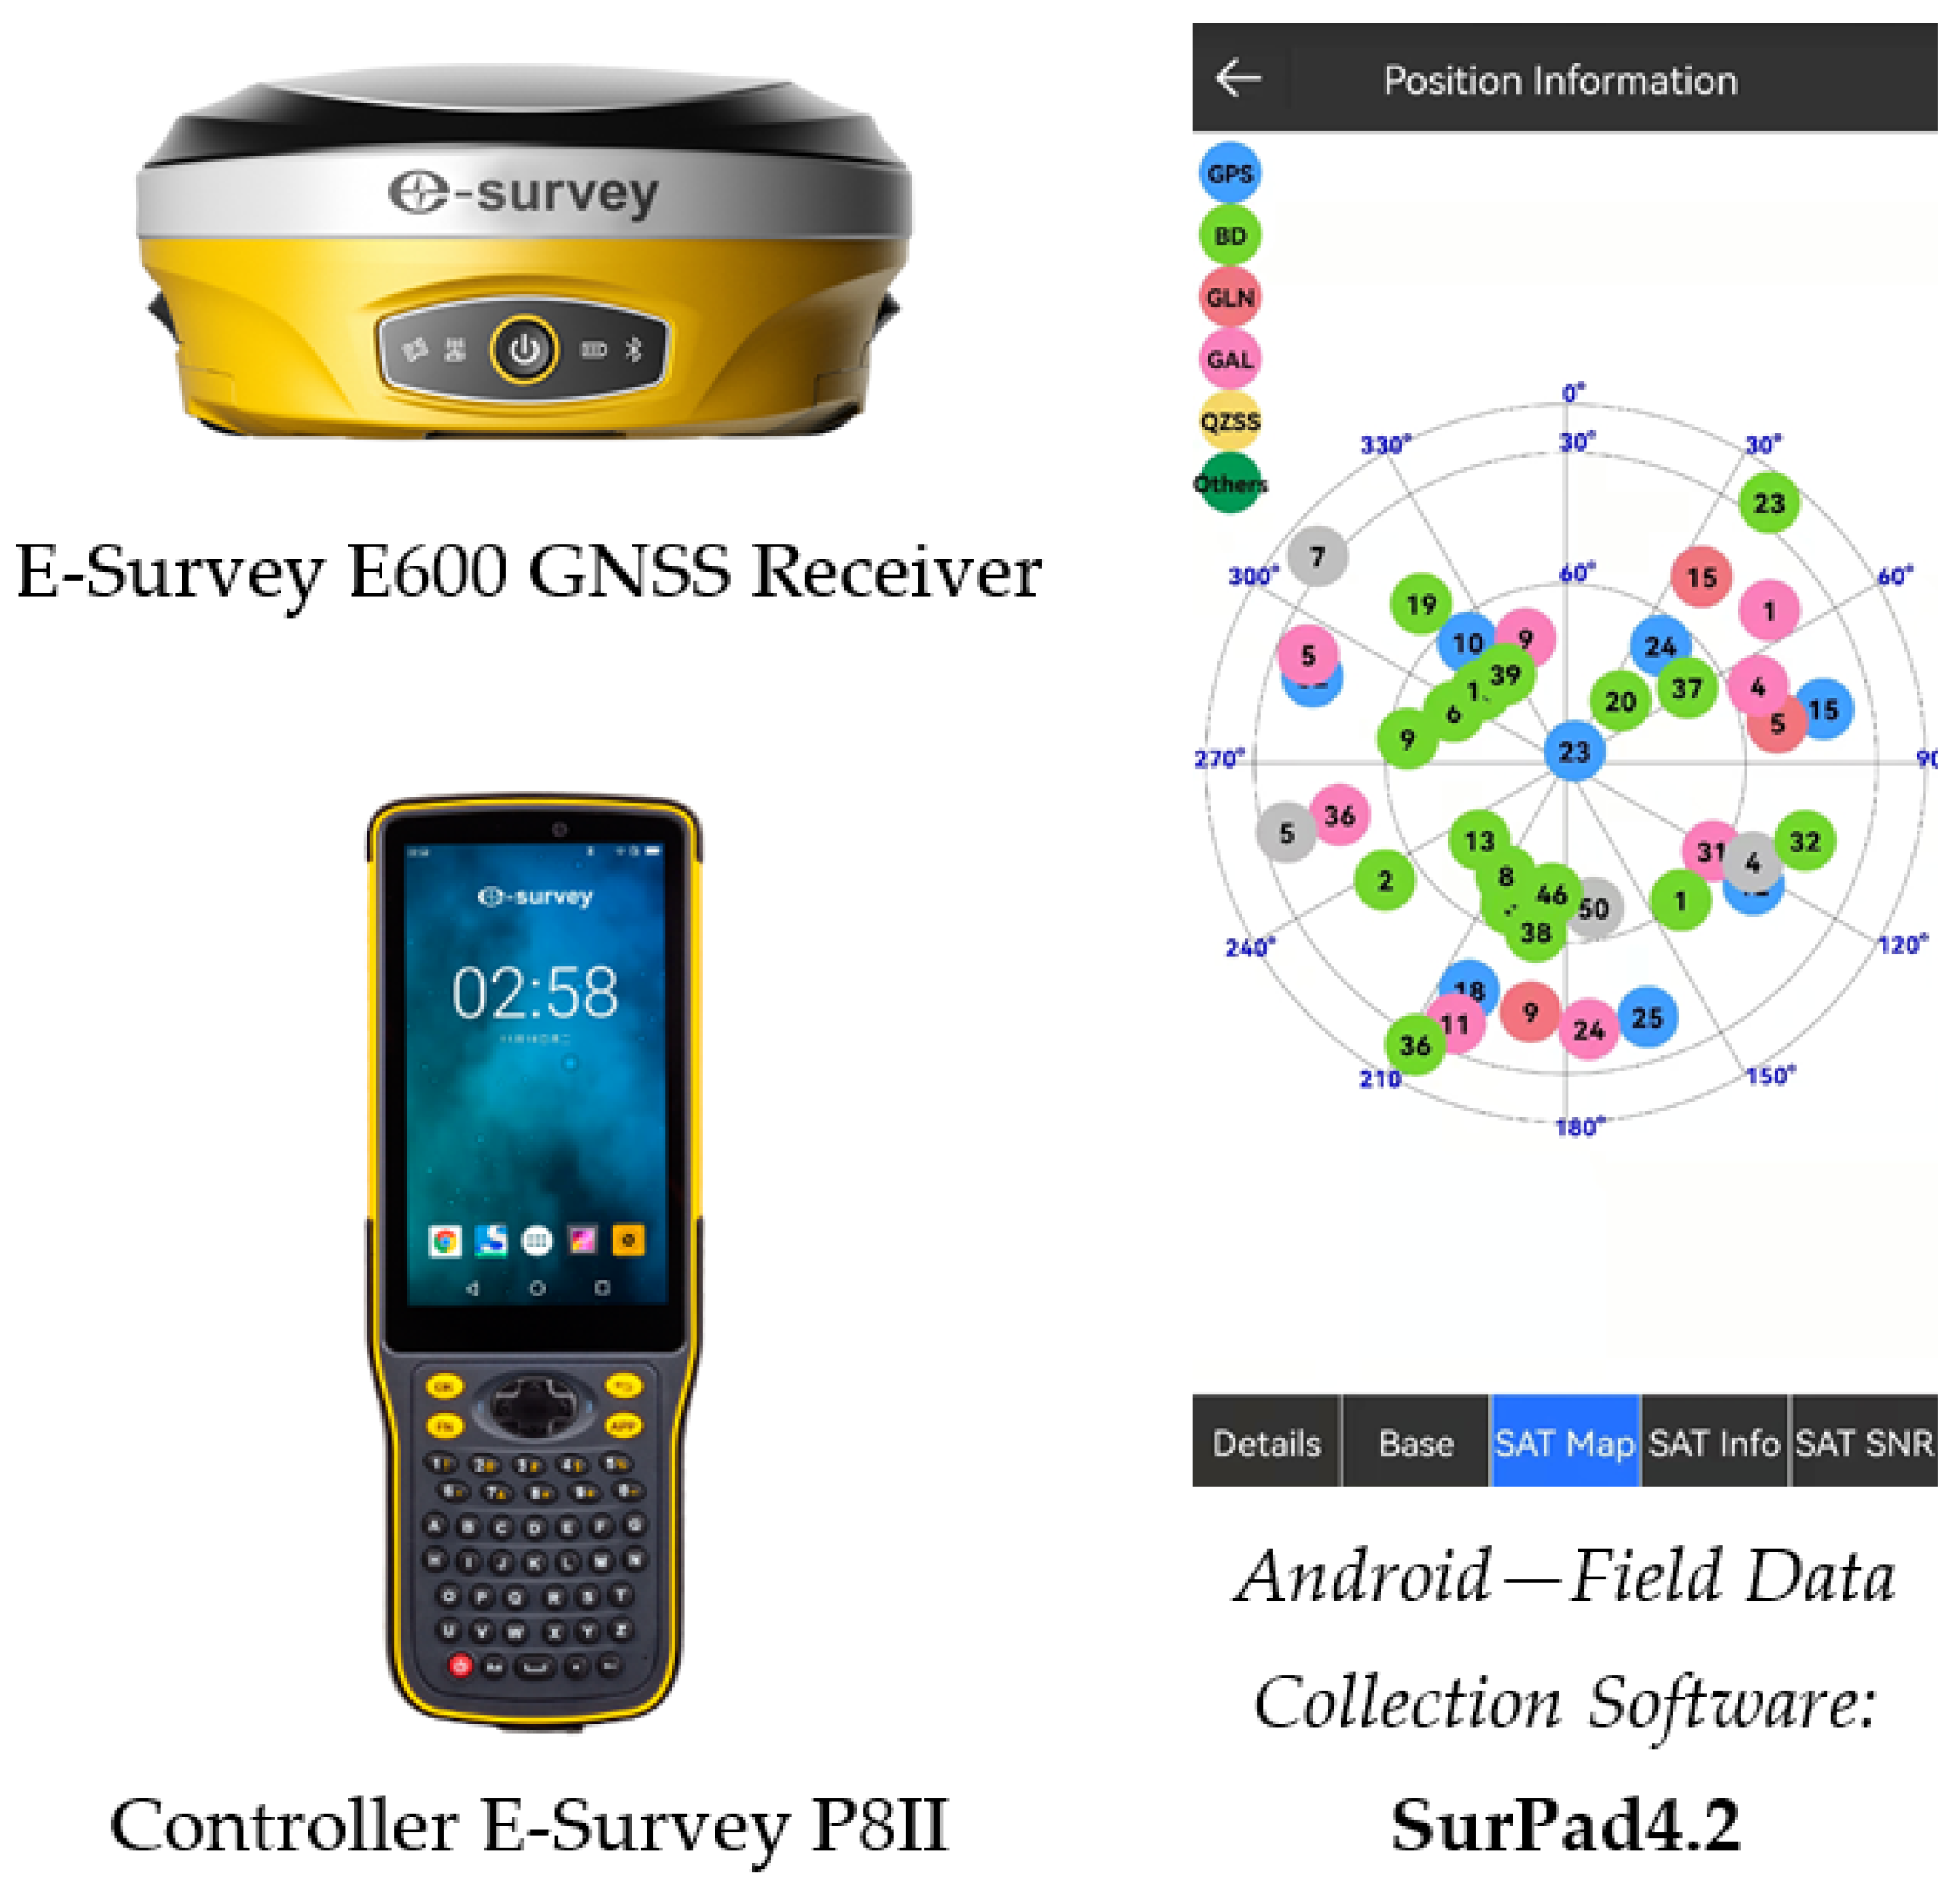 Amazing Performance of E600 in Chile - Shanghai, China - ESurvey GNSS